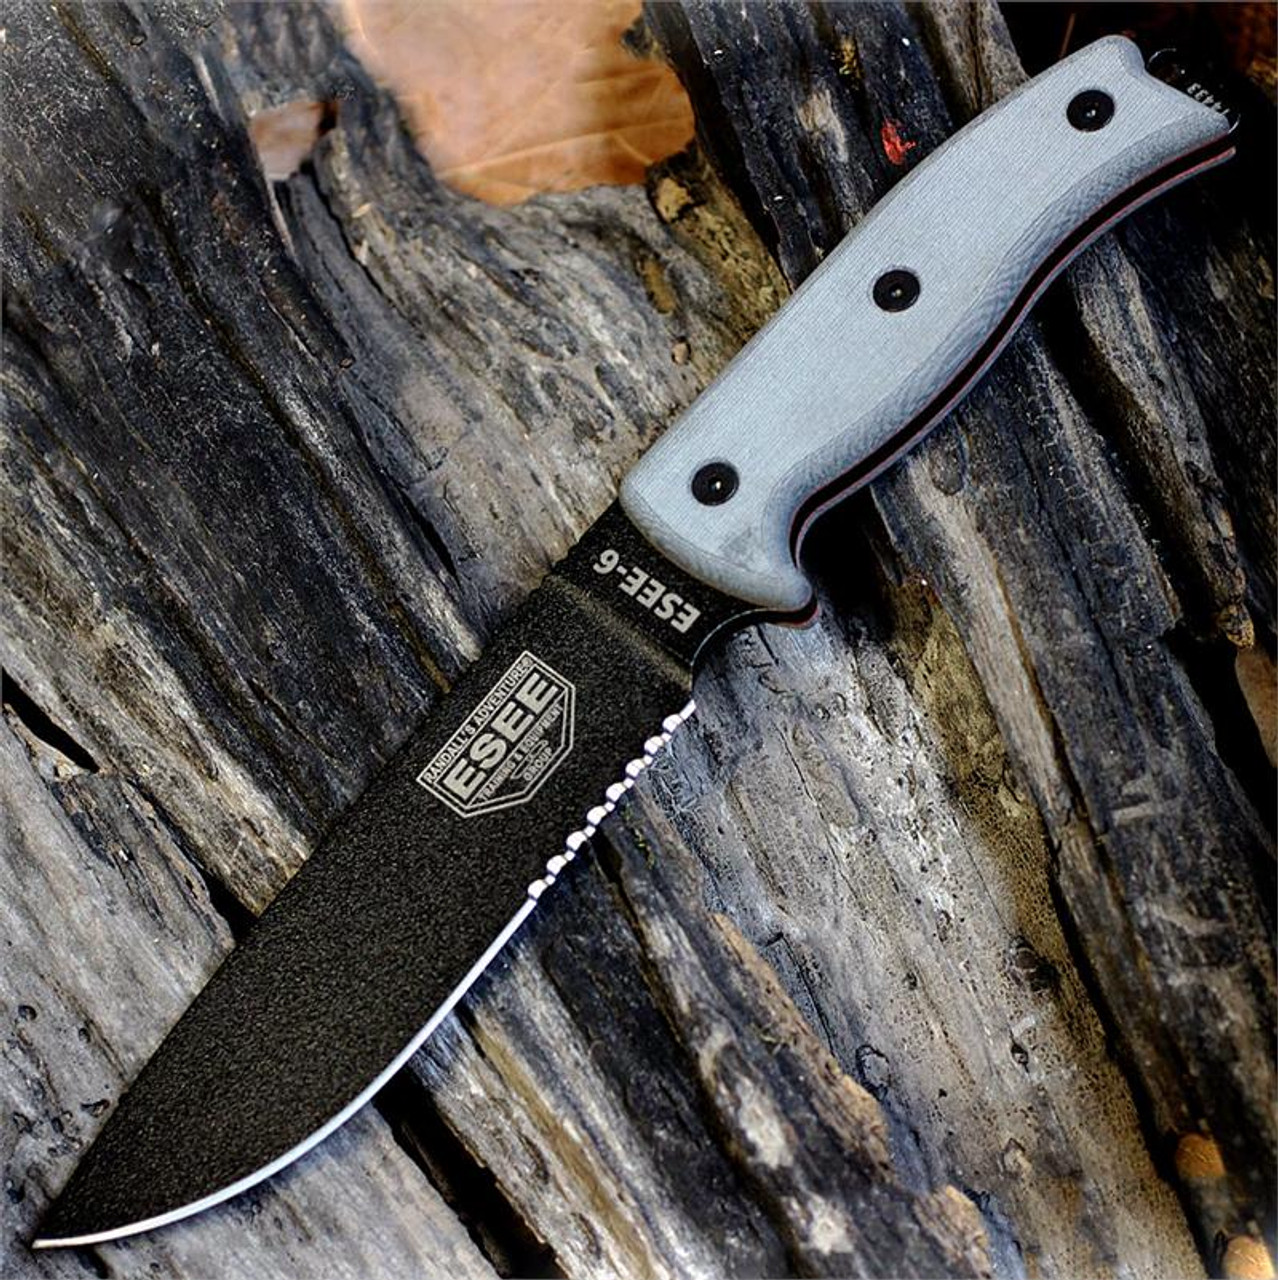 ESEE 6 OD Green Linen Micarta Handle 1095 Carbon Steel Model 6 Fixed Blade Knife product image